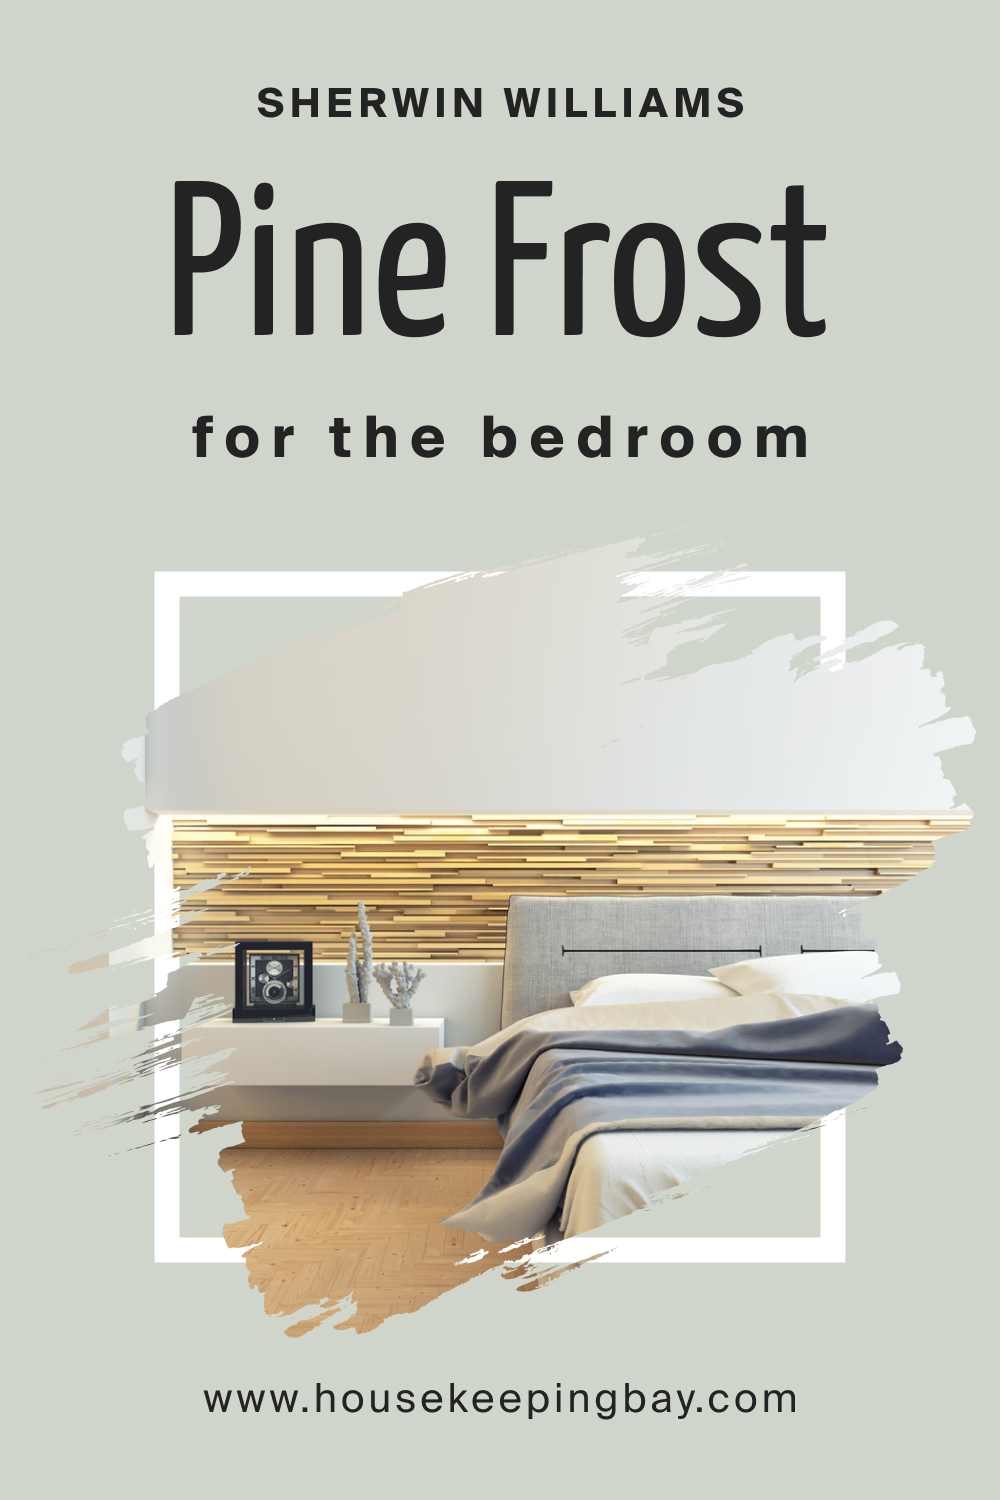 Sherwin Williams. SW 9656 Pine Frost For the bedroom